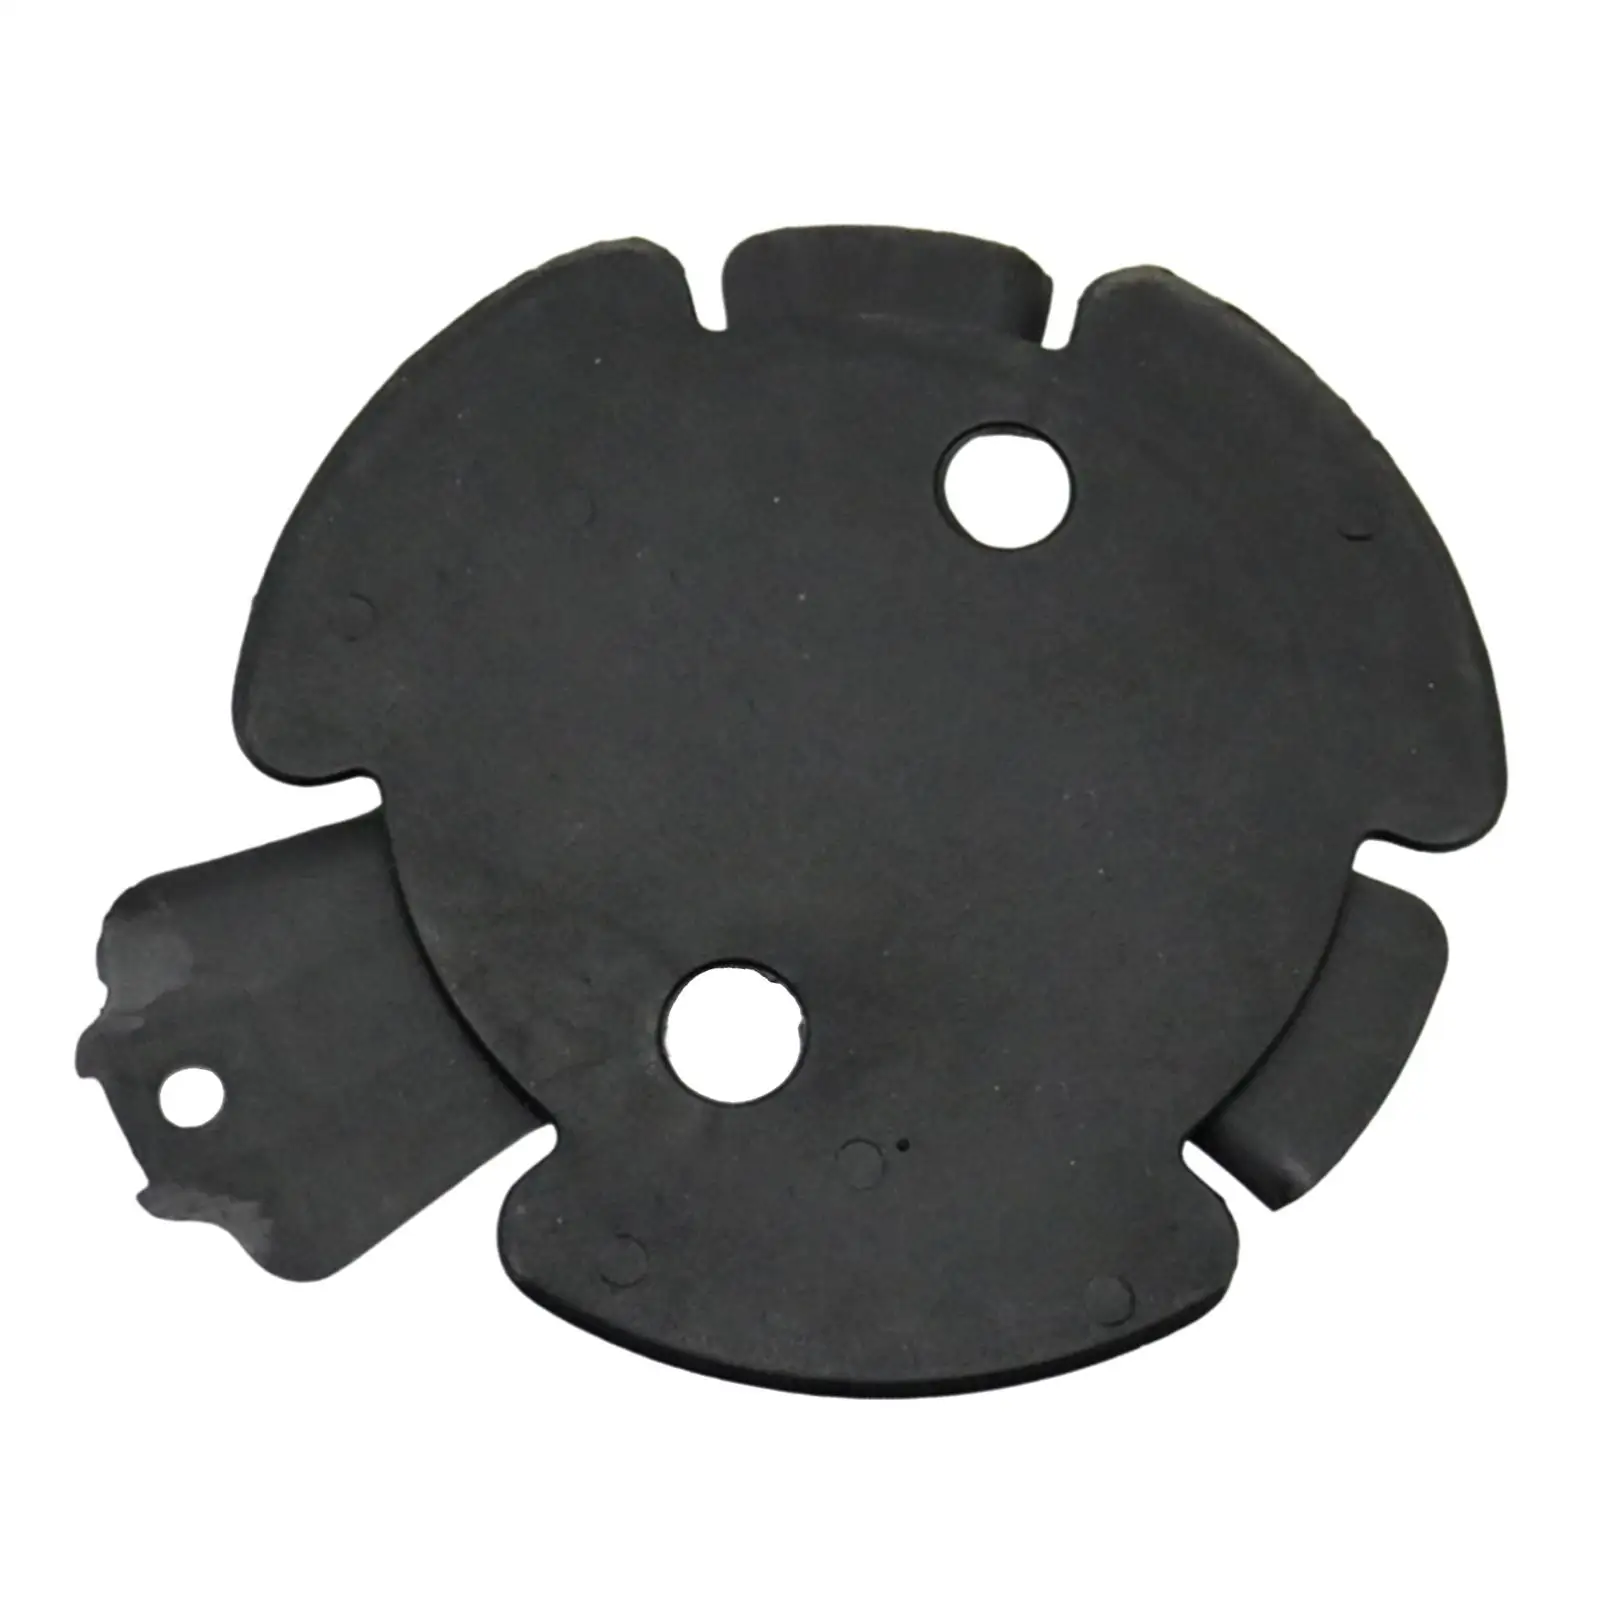 Auto Oil Sump Underfloor Drain Cover Flap, 7209541 Replace Professional Easy to Install